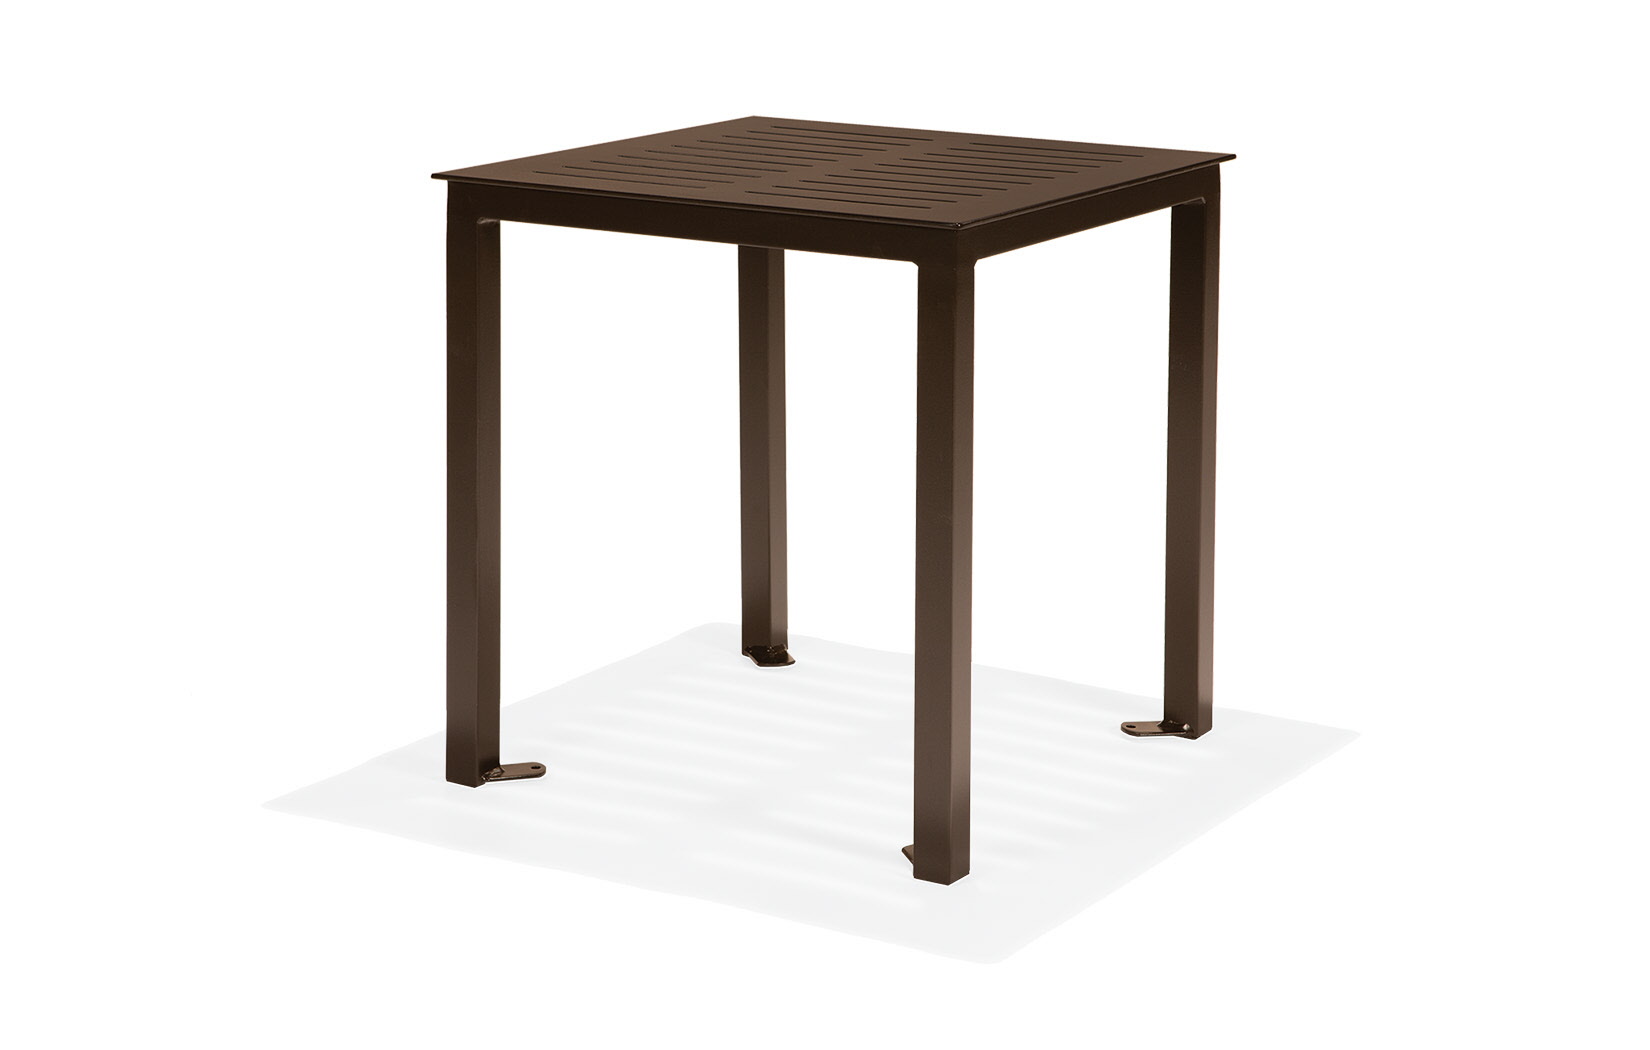 Portico 27 Inch Square Restaurant Dining Table